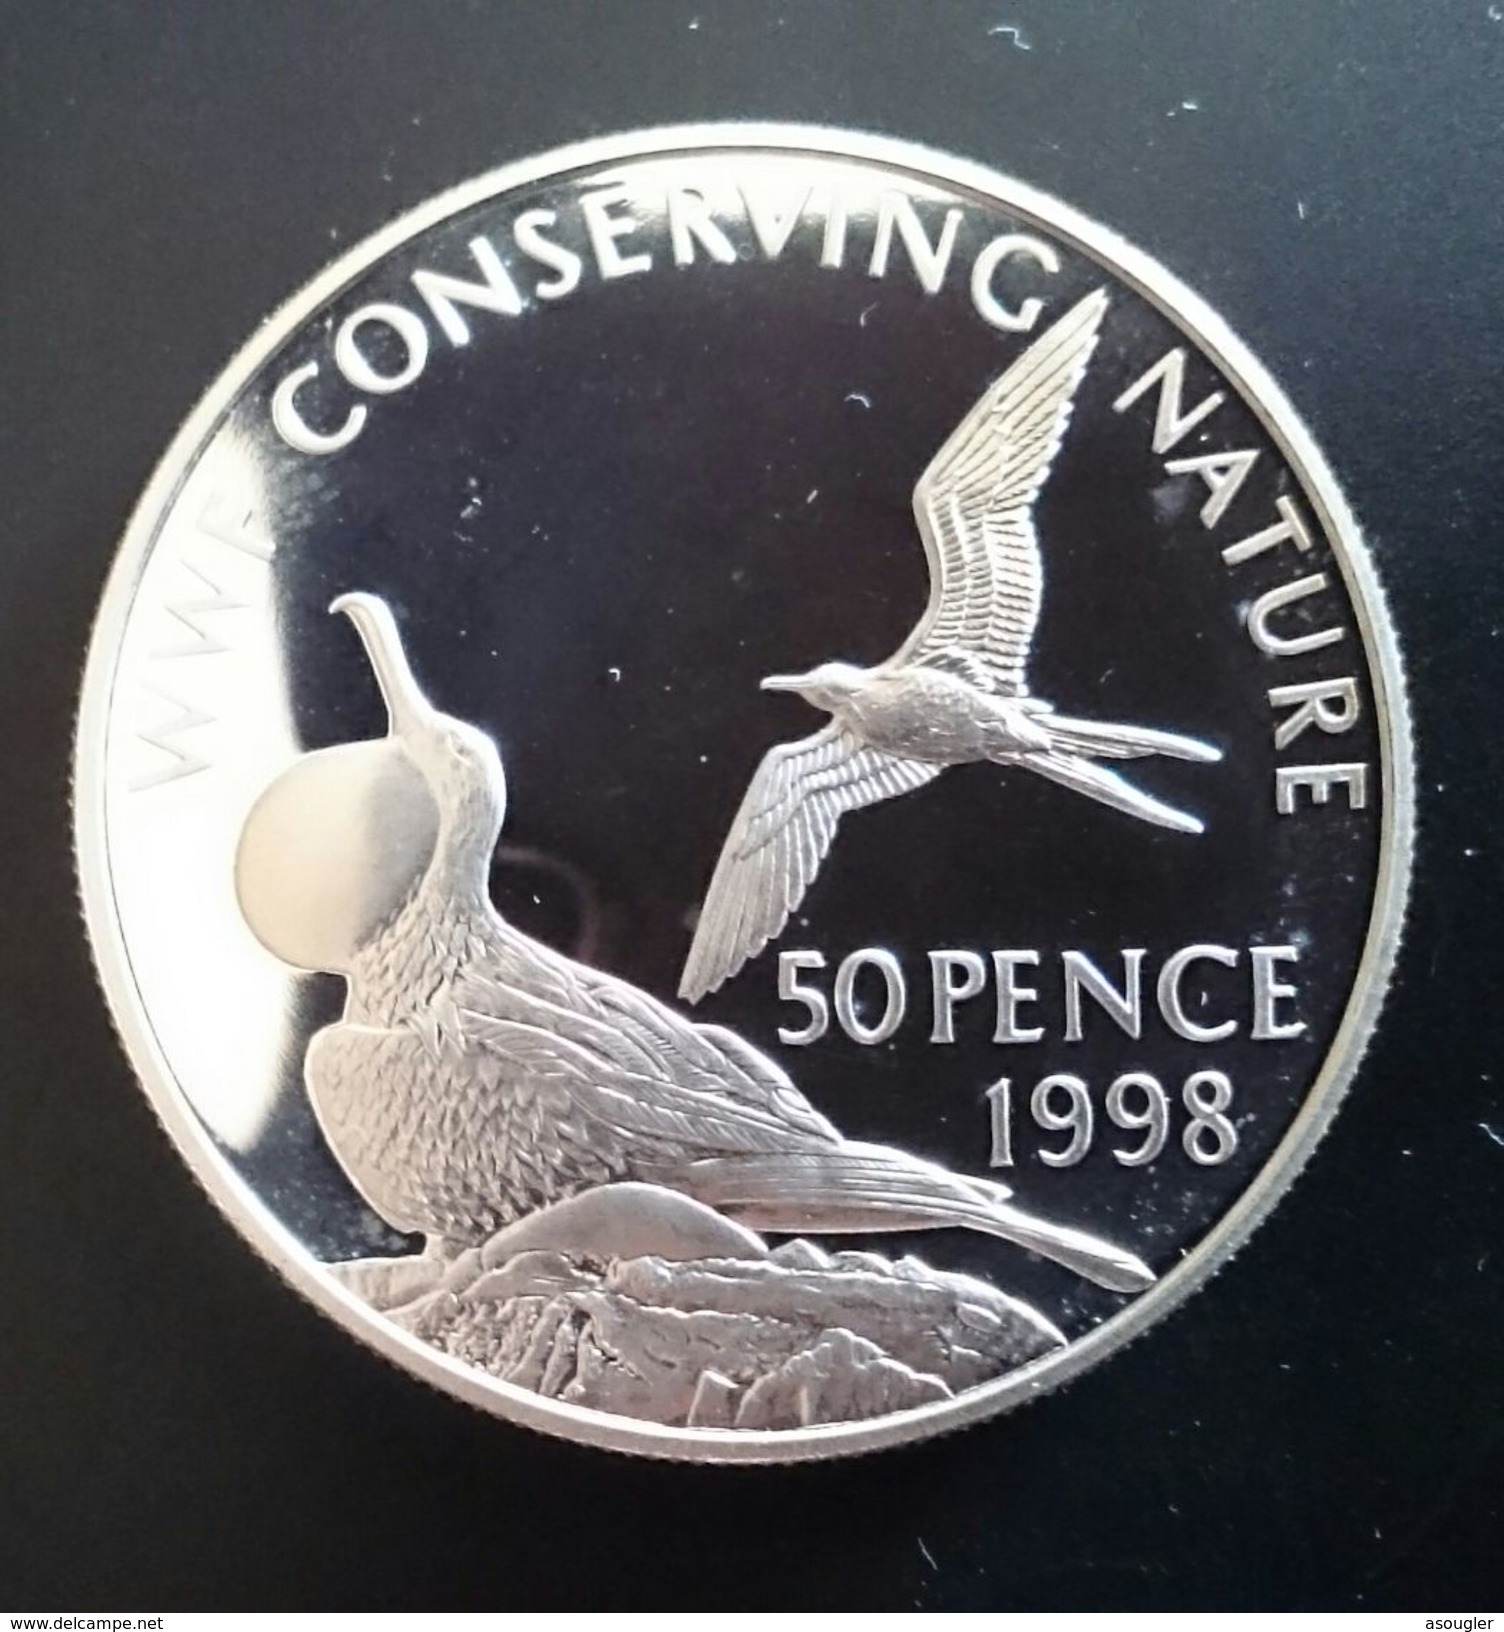 ASCENSION ISLAND 50 PENCE 1998 SILVER PROOF "World Wildlife Fund - Conserving Nature" Free Shipping Via Registered Air - Ascension (Insel)